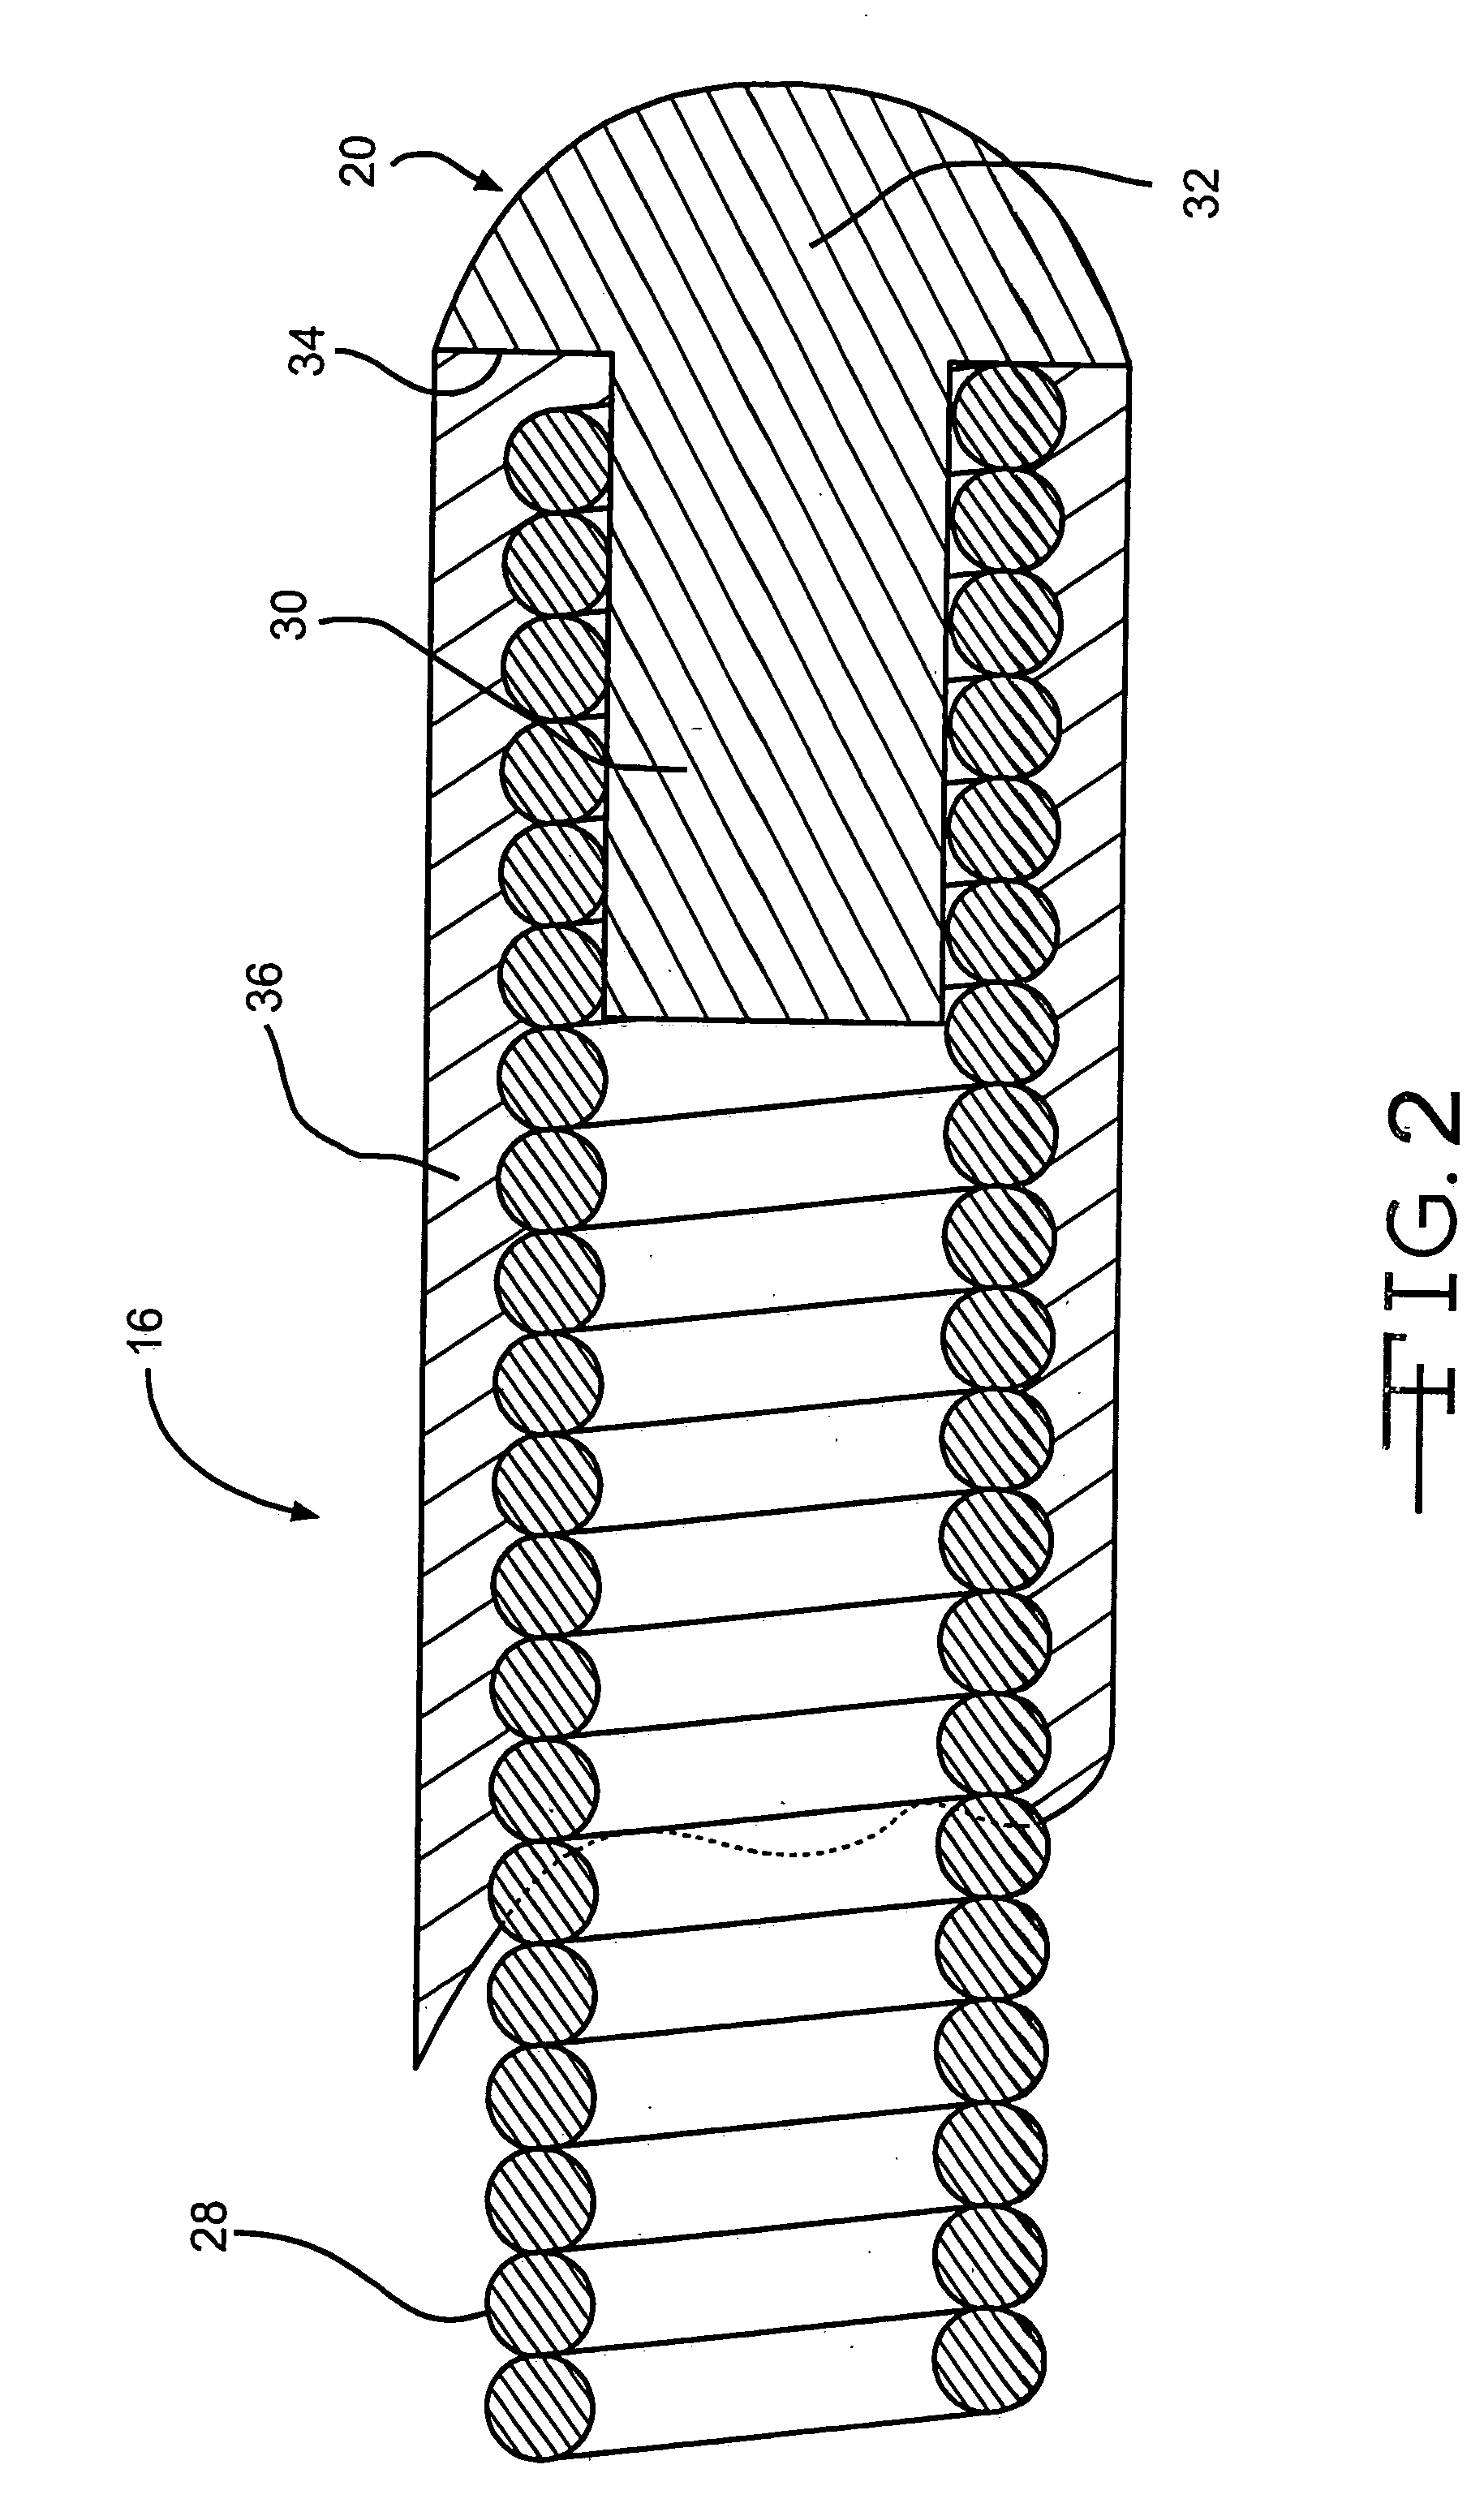 Implantable electrical lead wire